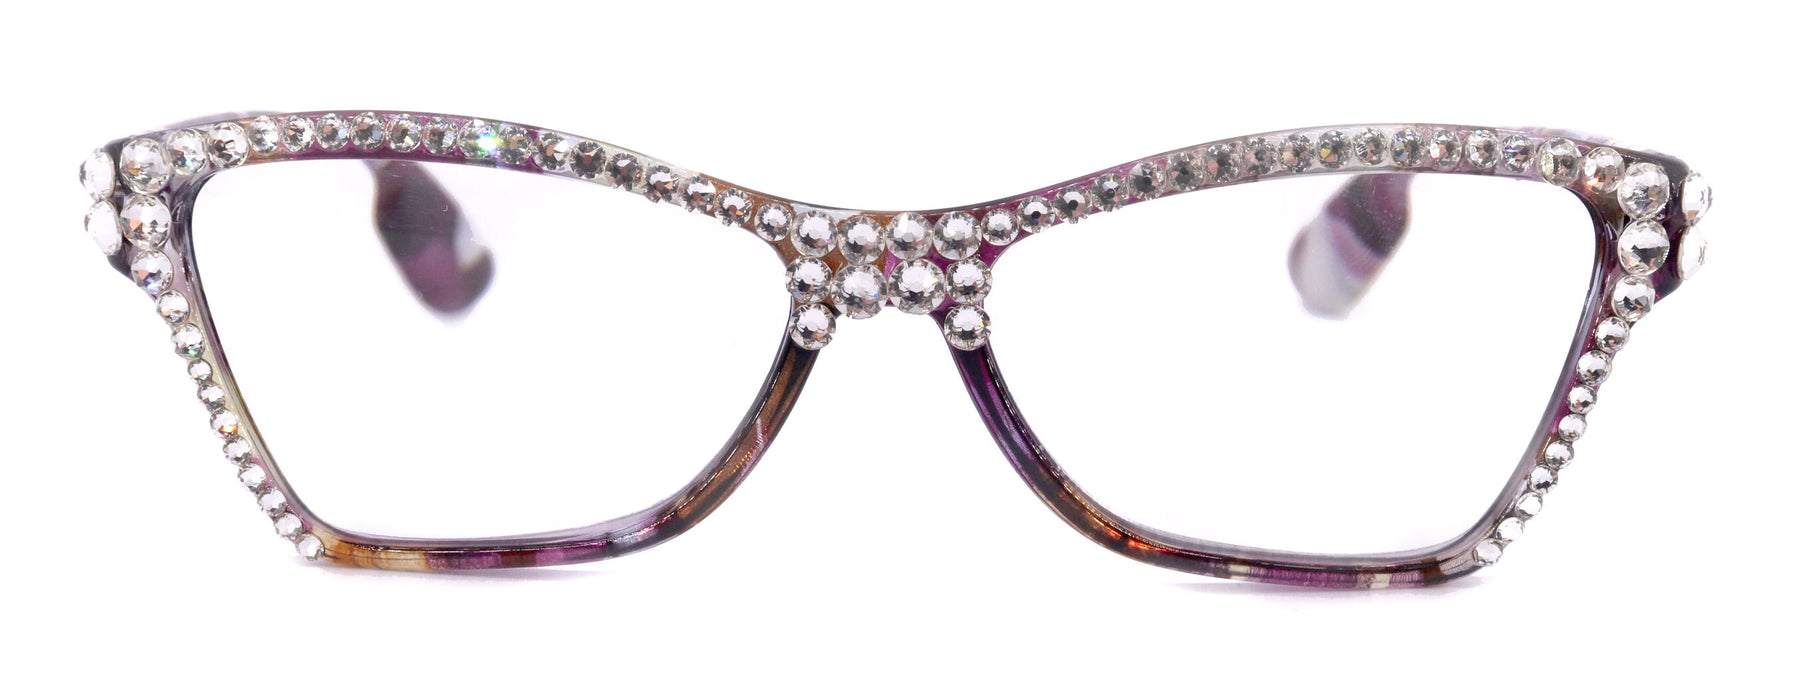 Avian, (Bling) Women Reading Glasses w (Full TOP) (Clear) Genuine European Crystals, Magnifying, Cat Eye (Purple, Blue) NY Fifth Avenue.